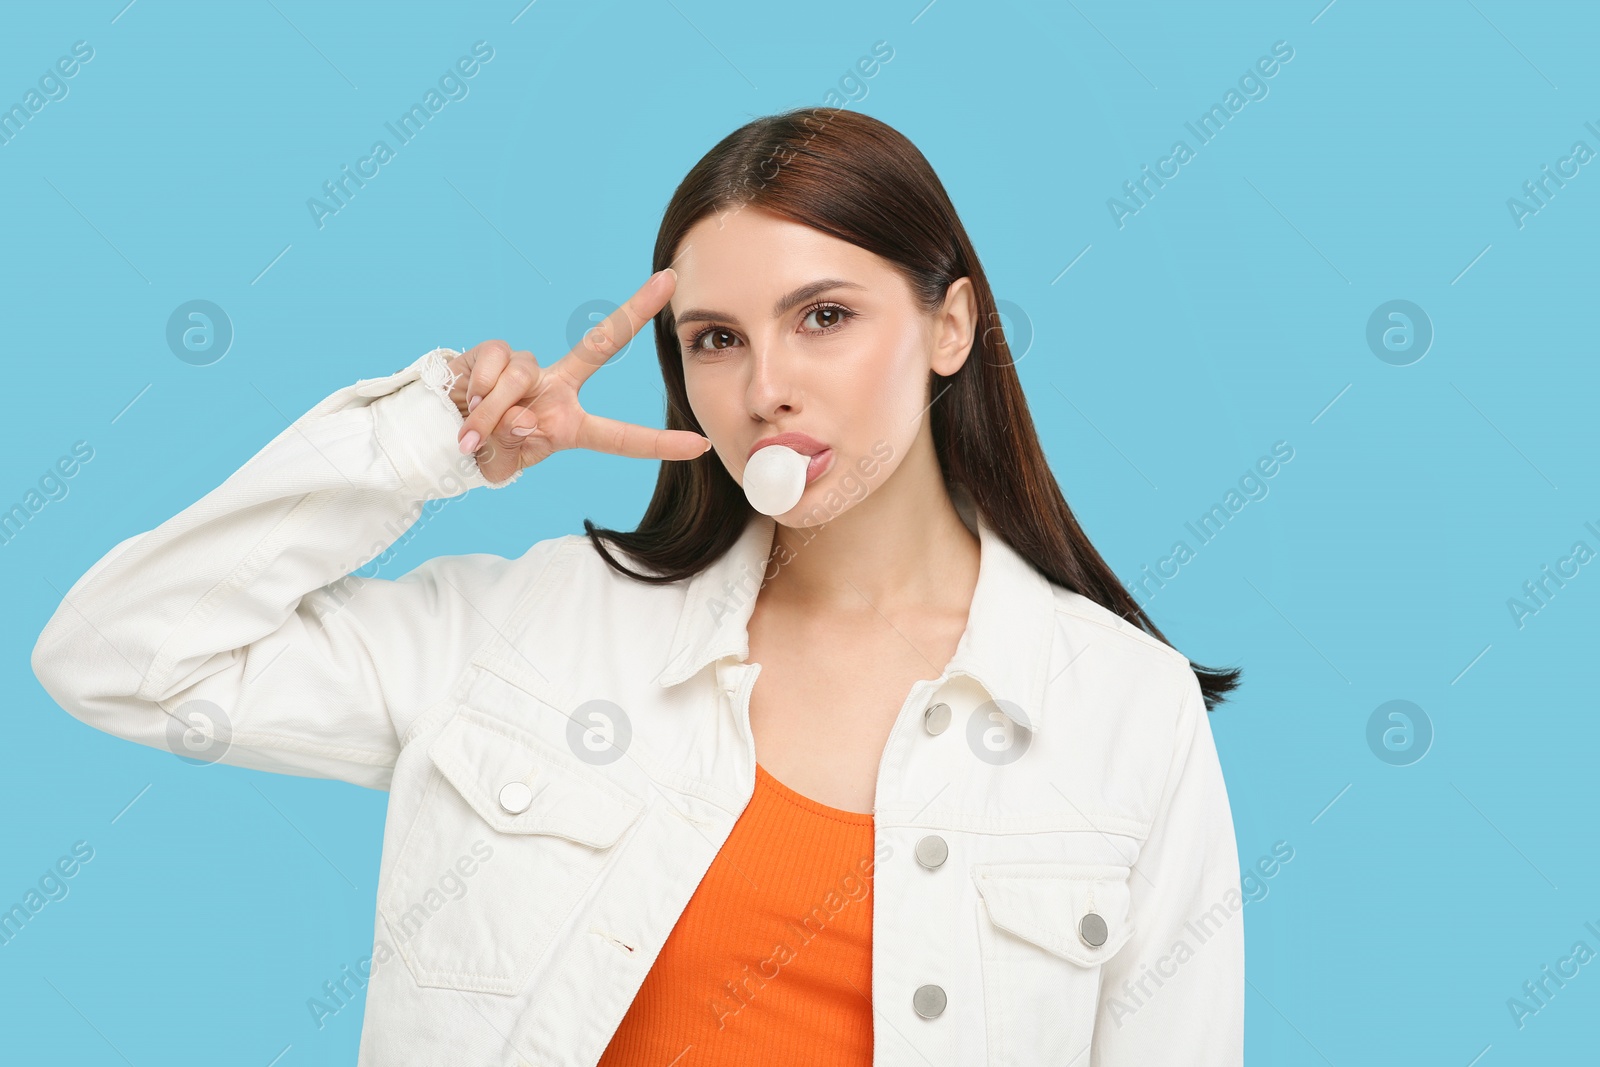 Photo of Beautiful woman blowing bubble gum and gesturing on light blue background